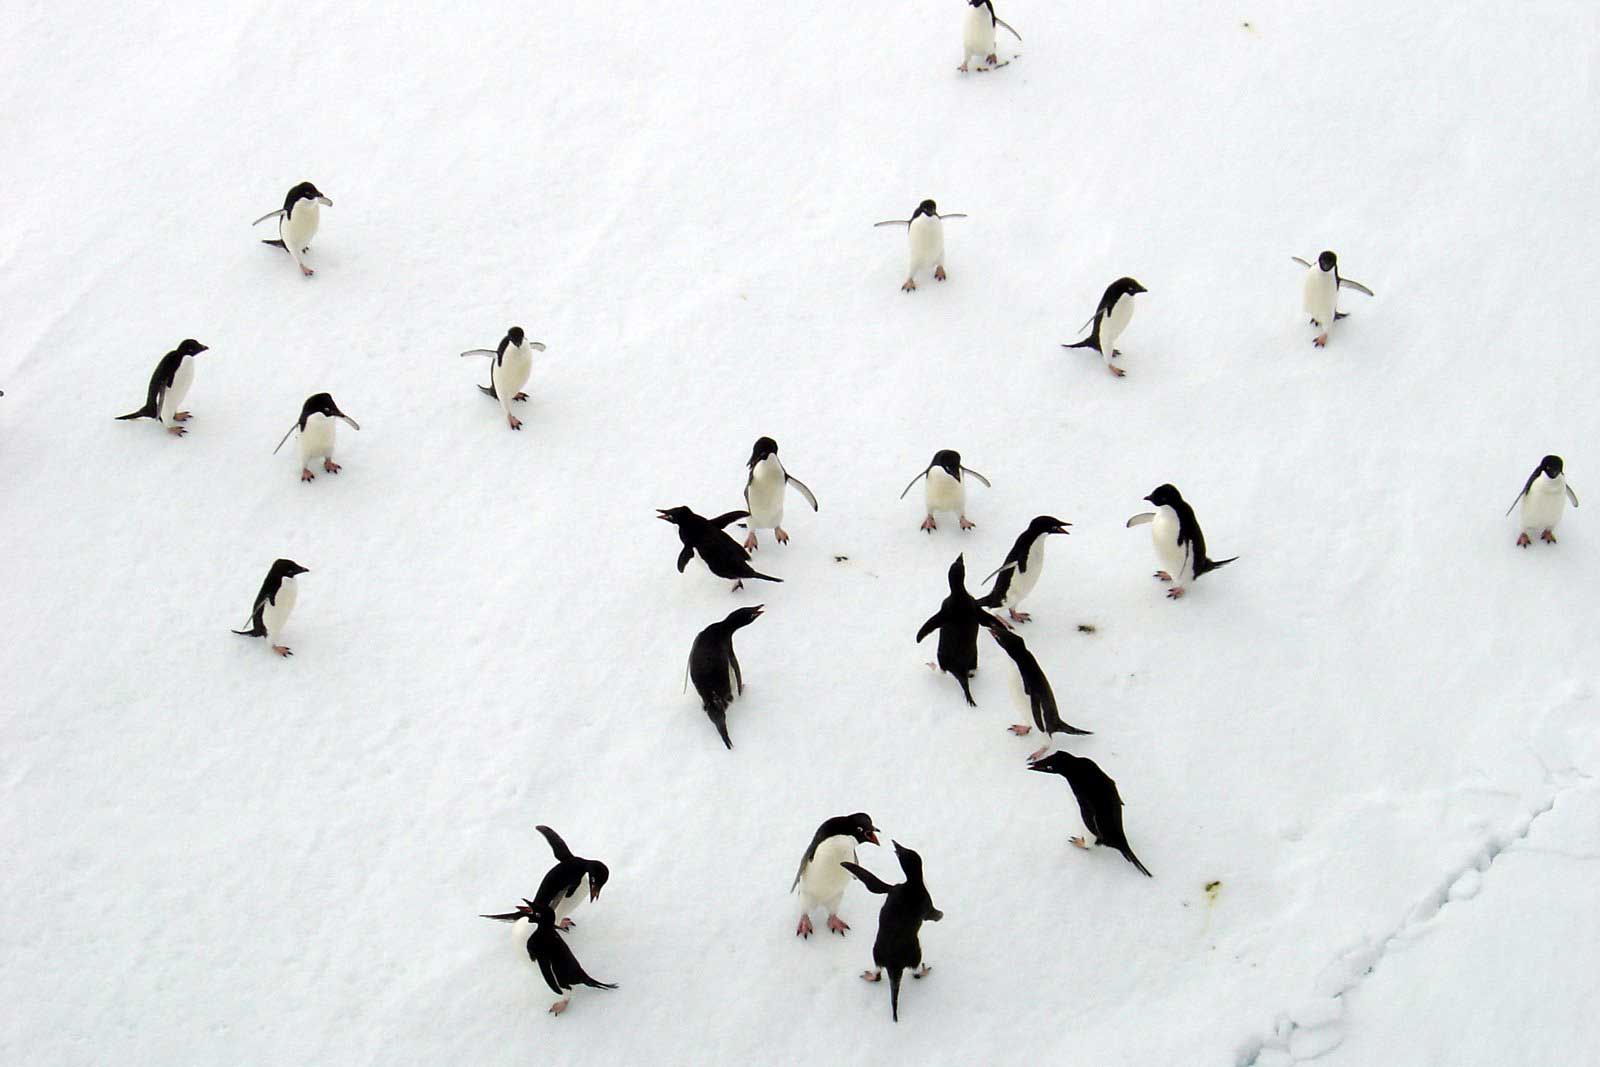 Penguins from above